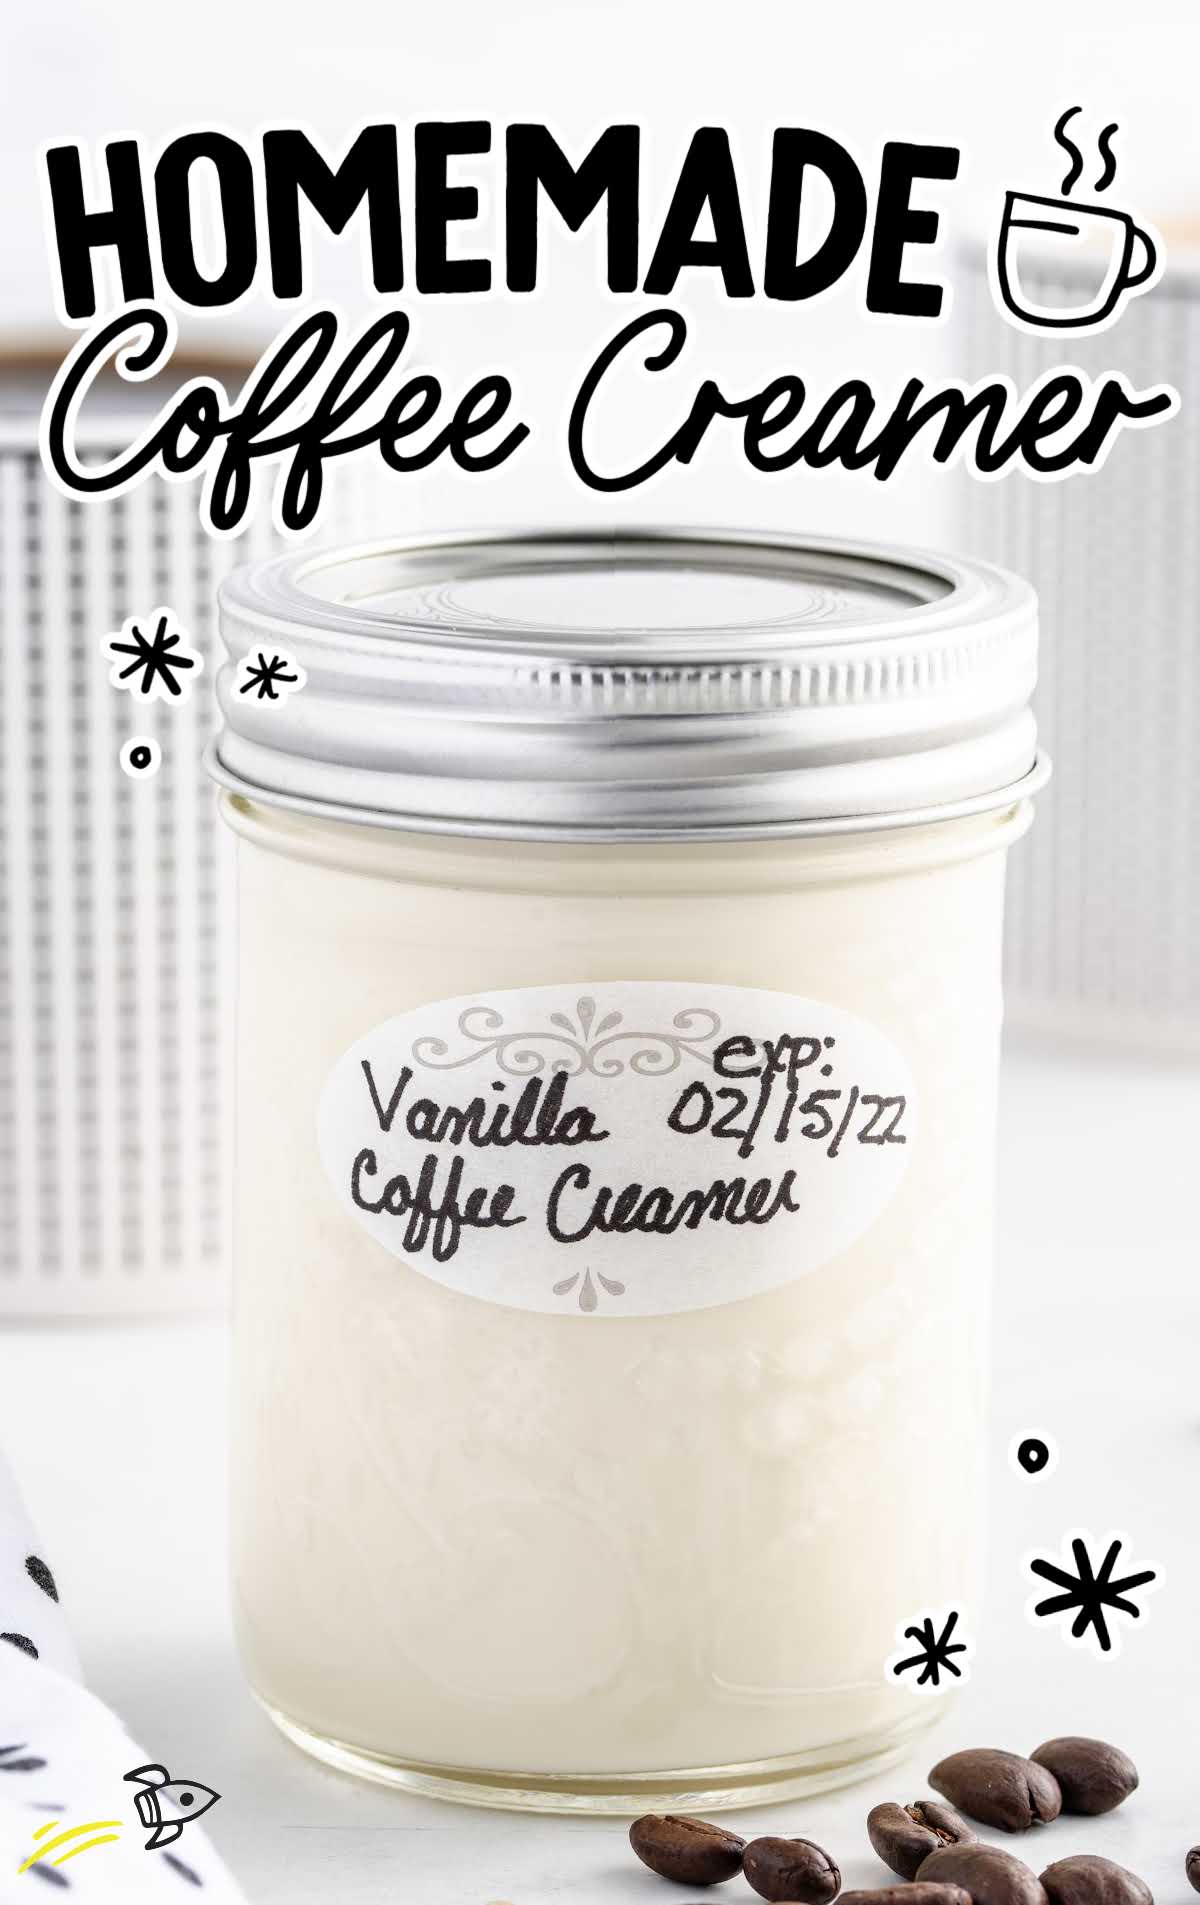 close up shot of a jar of homemade coffee creamer with a label